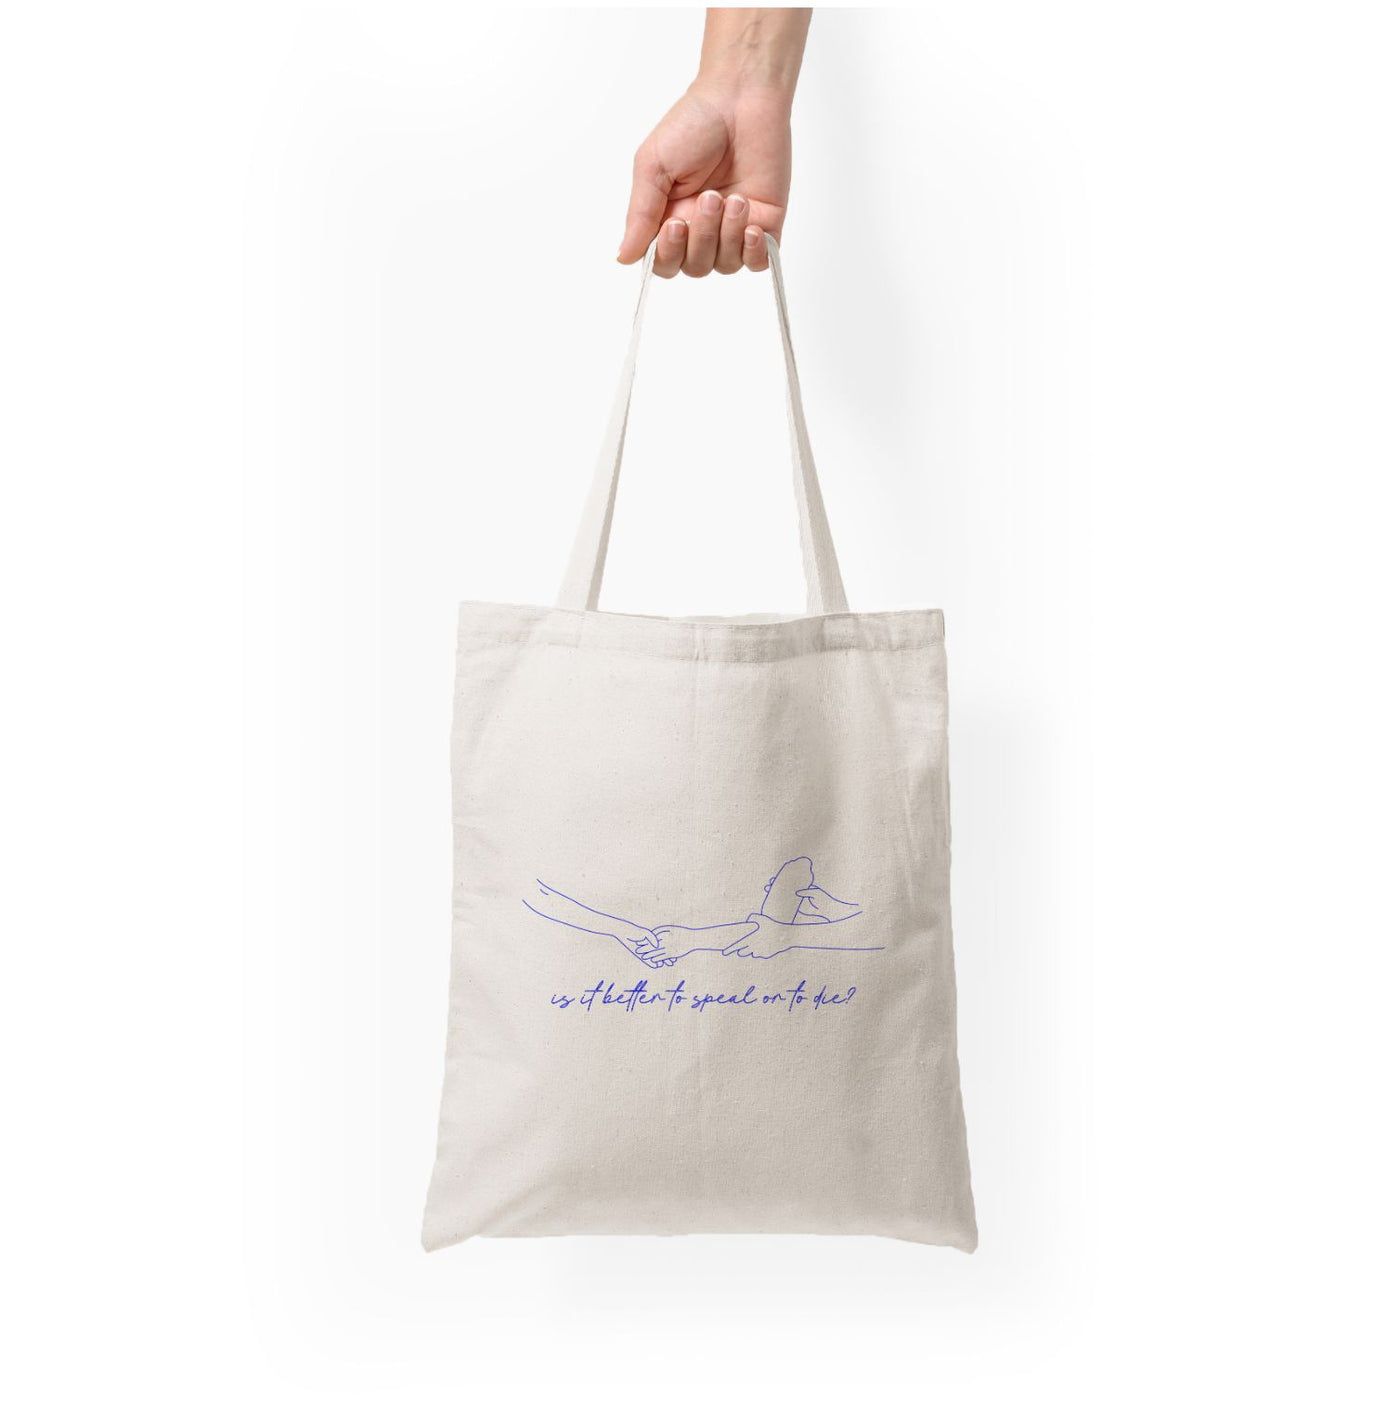 Is It Better To Speak Or To Die? - Call Me By Your Name Tote Bag